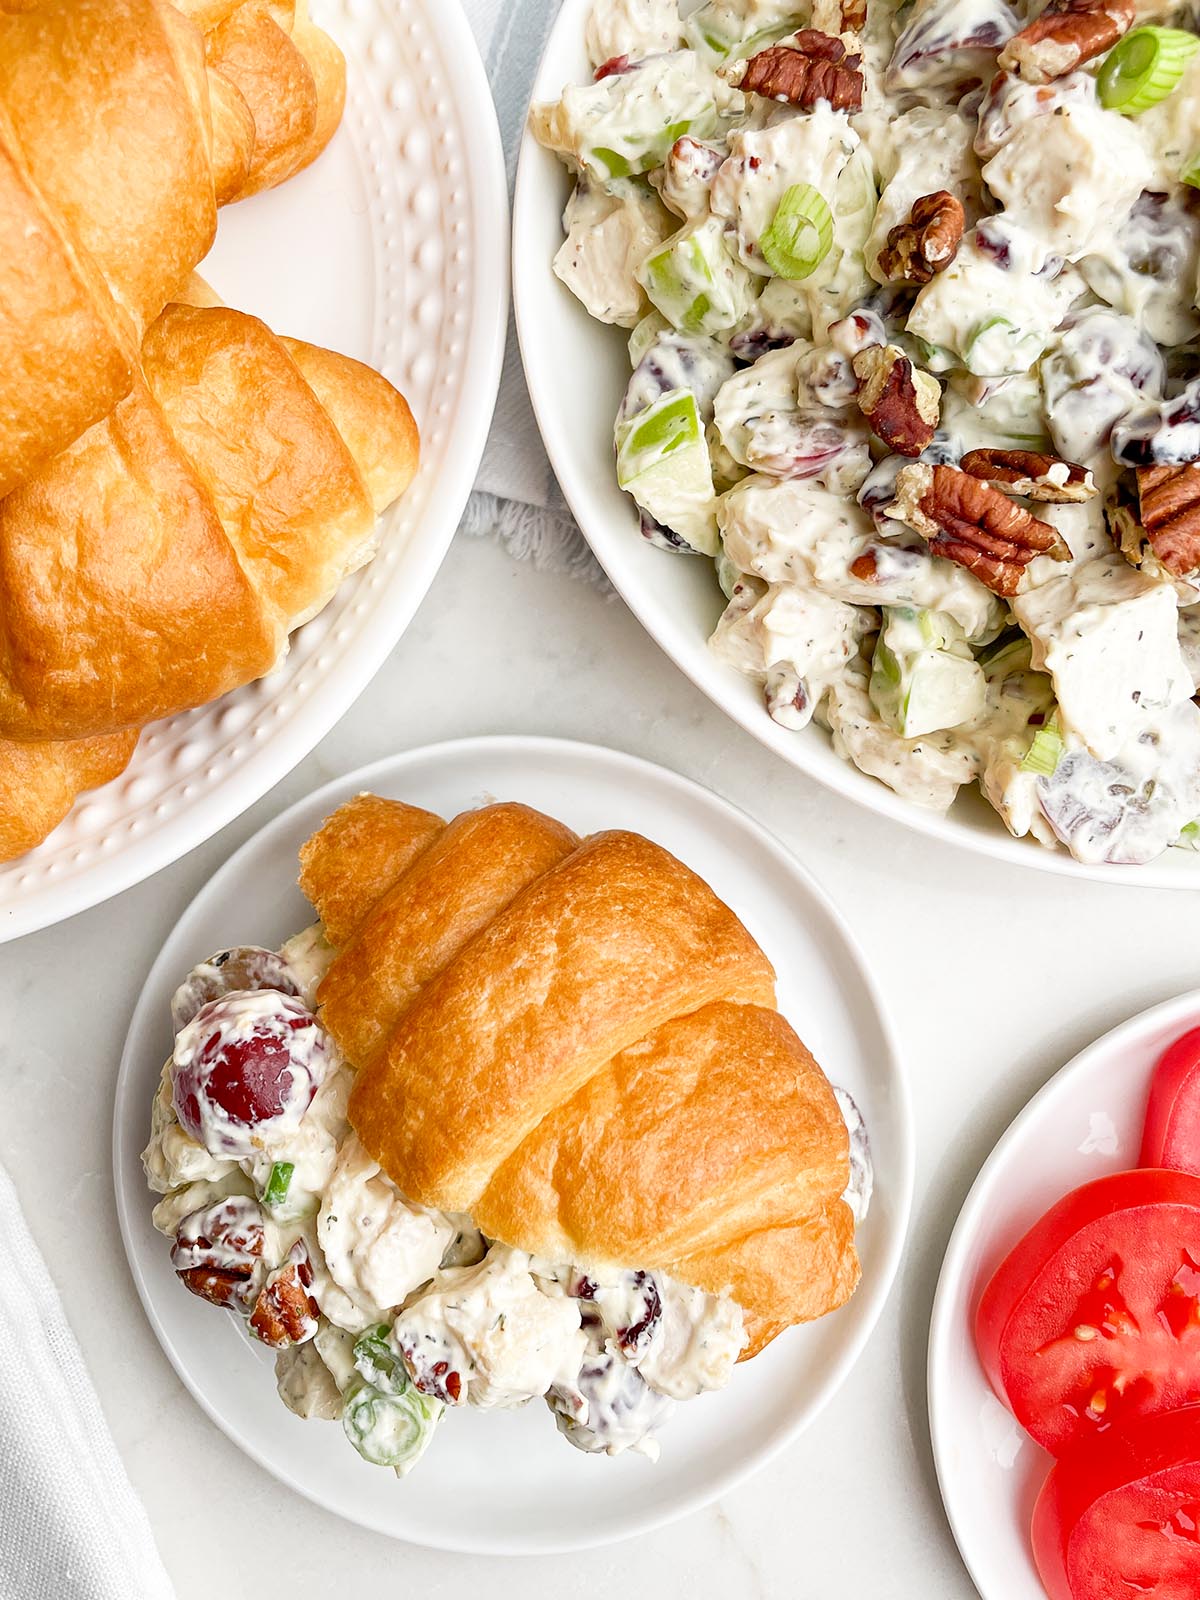 cranberry pecan chicken salad on a croissant with bowl of salad and plate of croissants in background